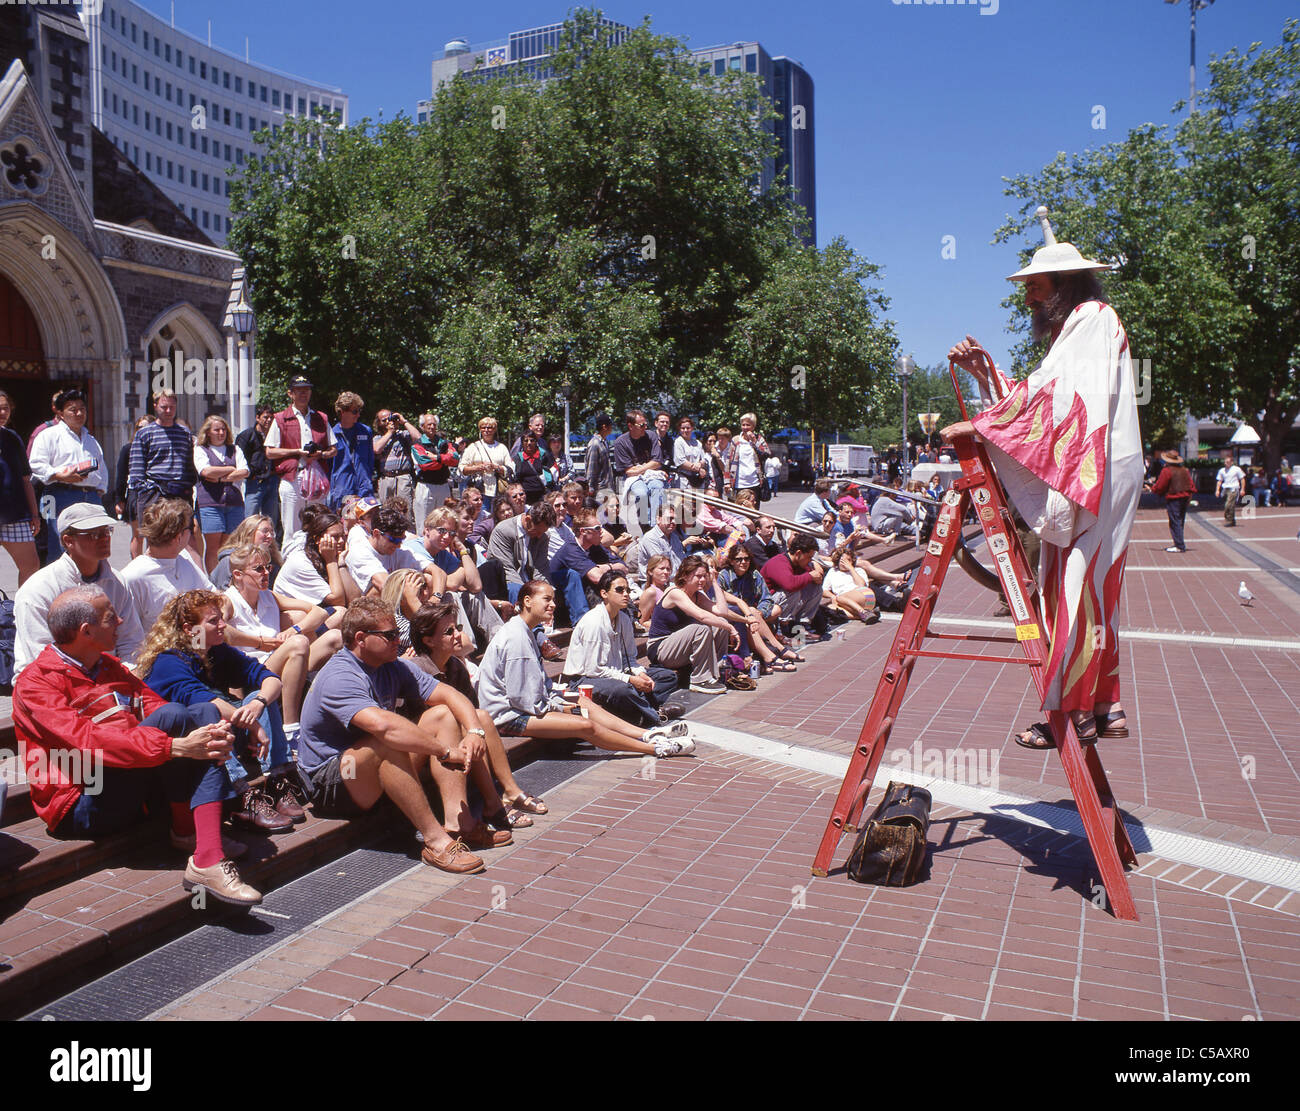 The 'Christchurch Wizard' giving a speech in Cathedral Square, Christchurch, Canterbury Region, South Island, New Zealand Stock Photo